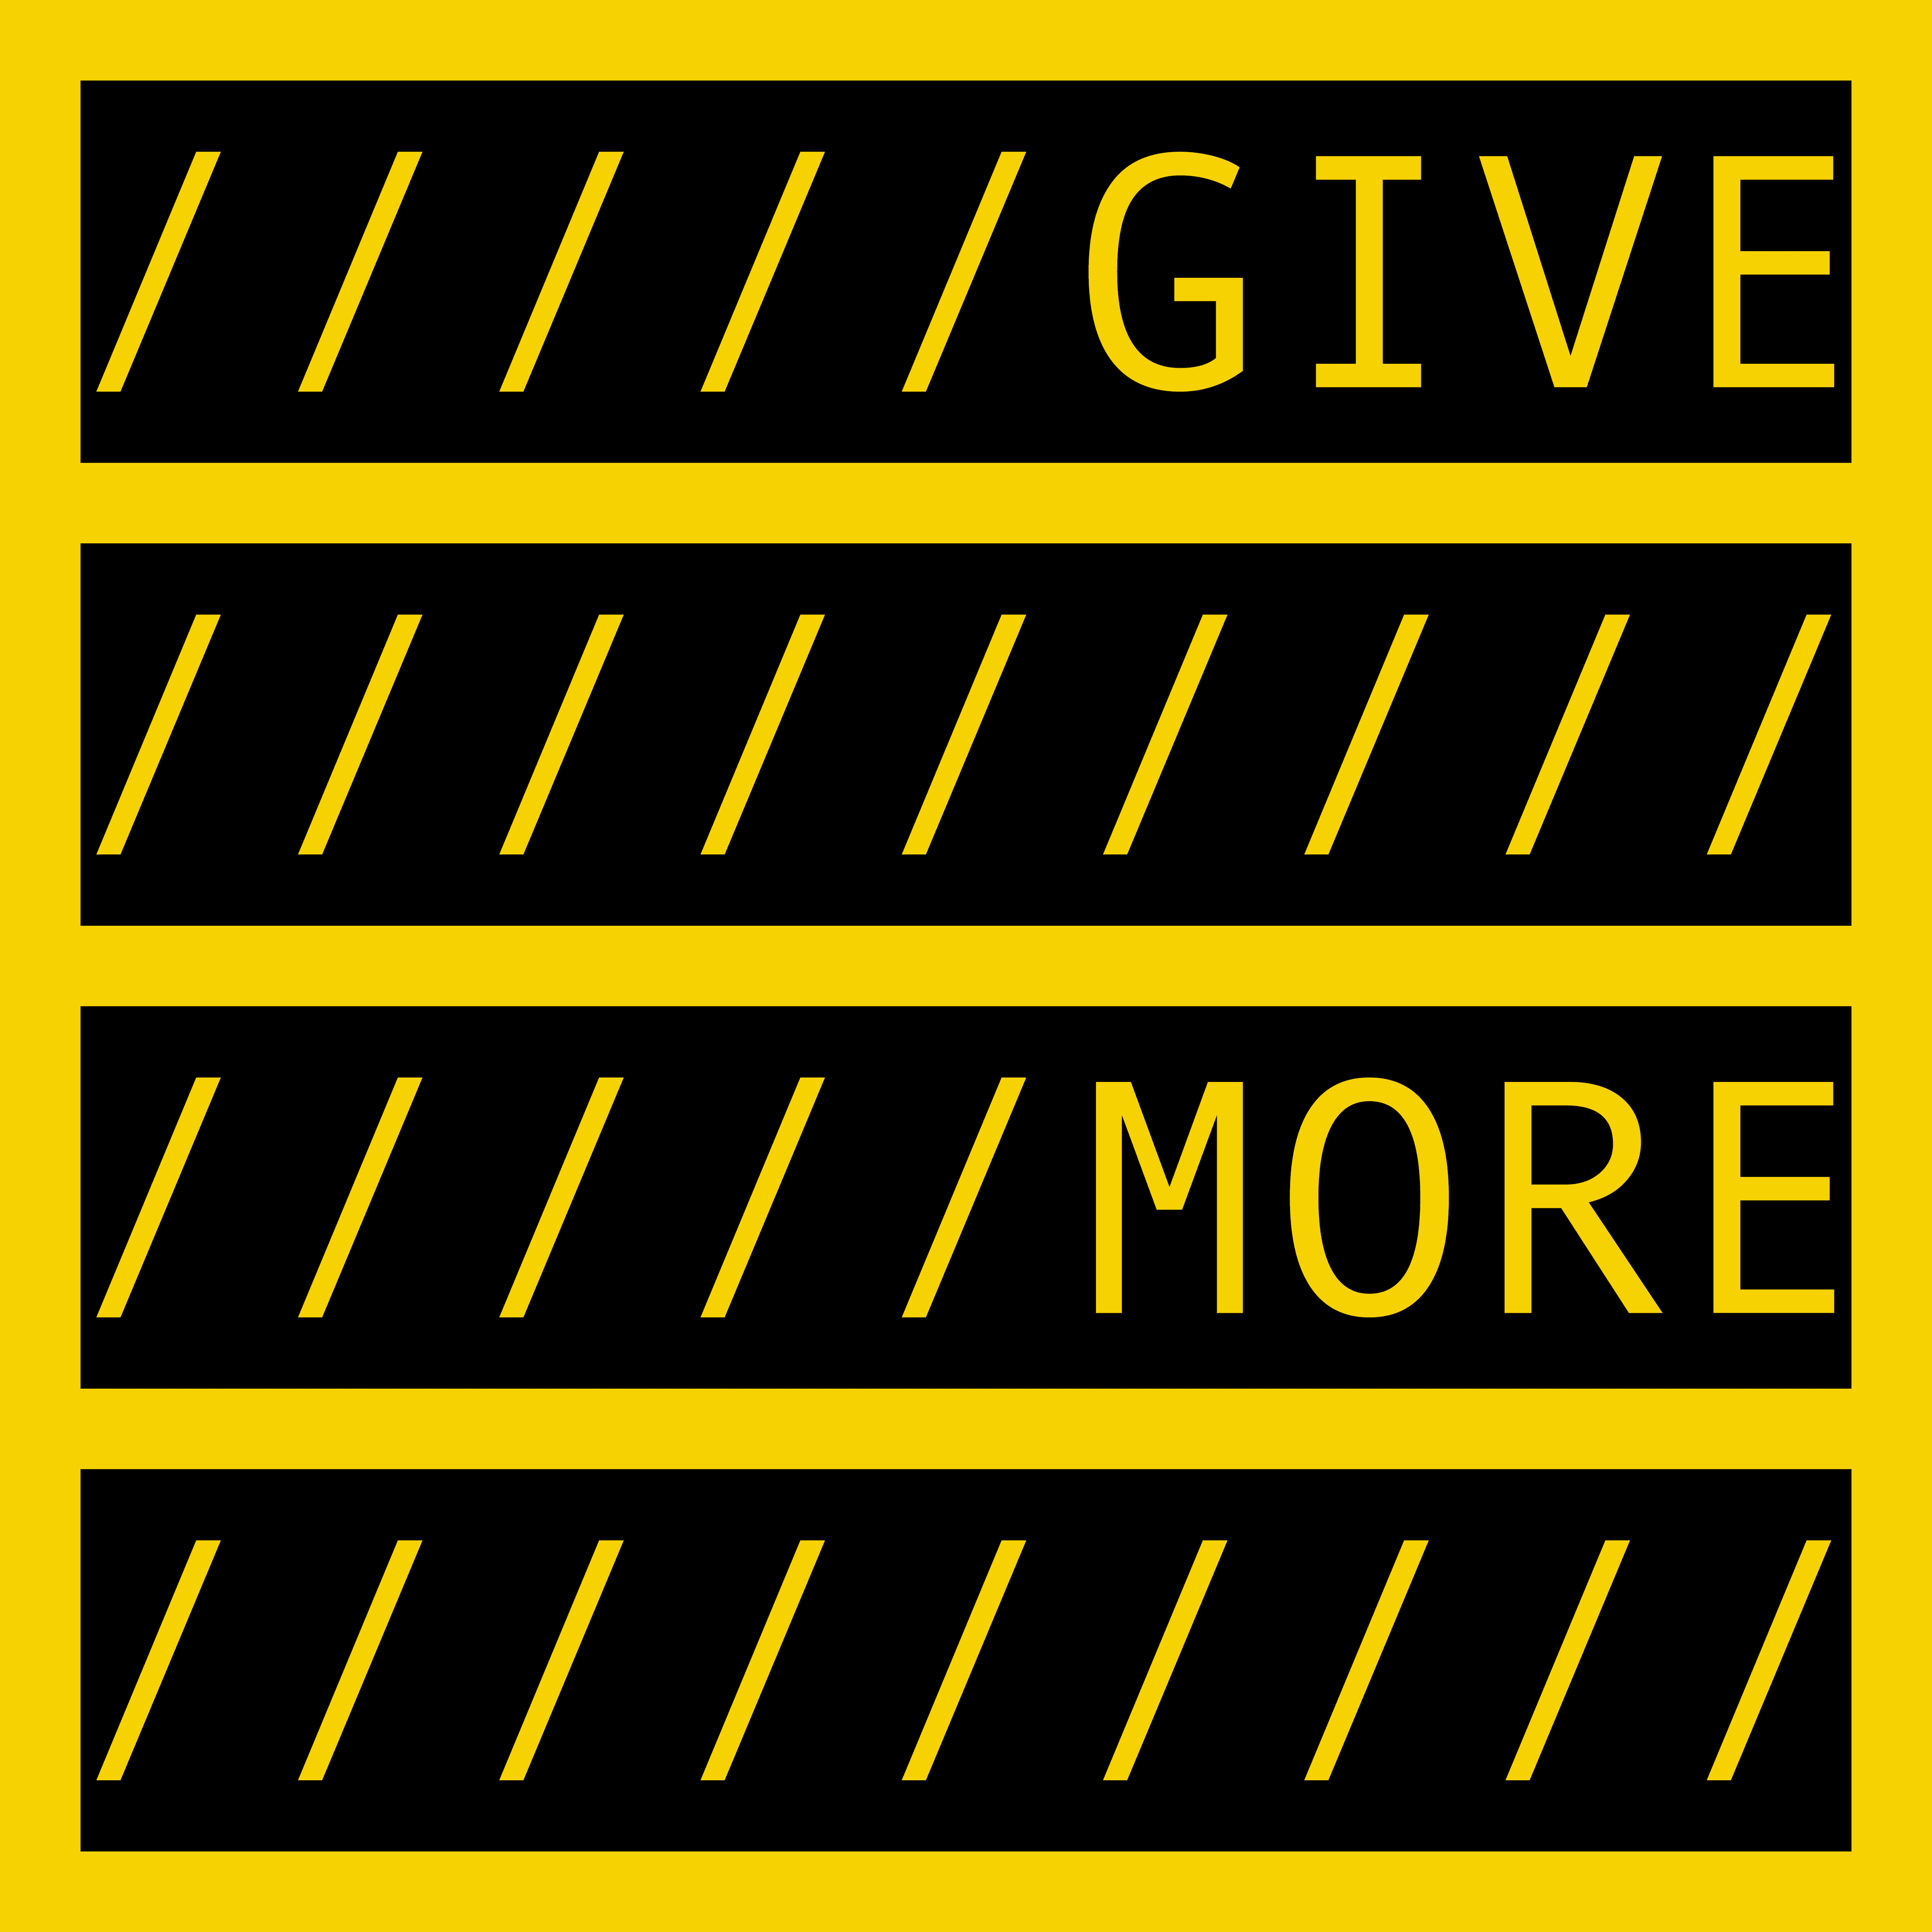 GIVE MORE